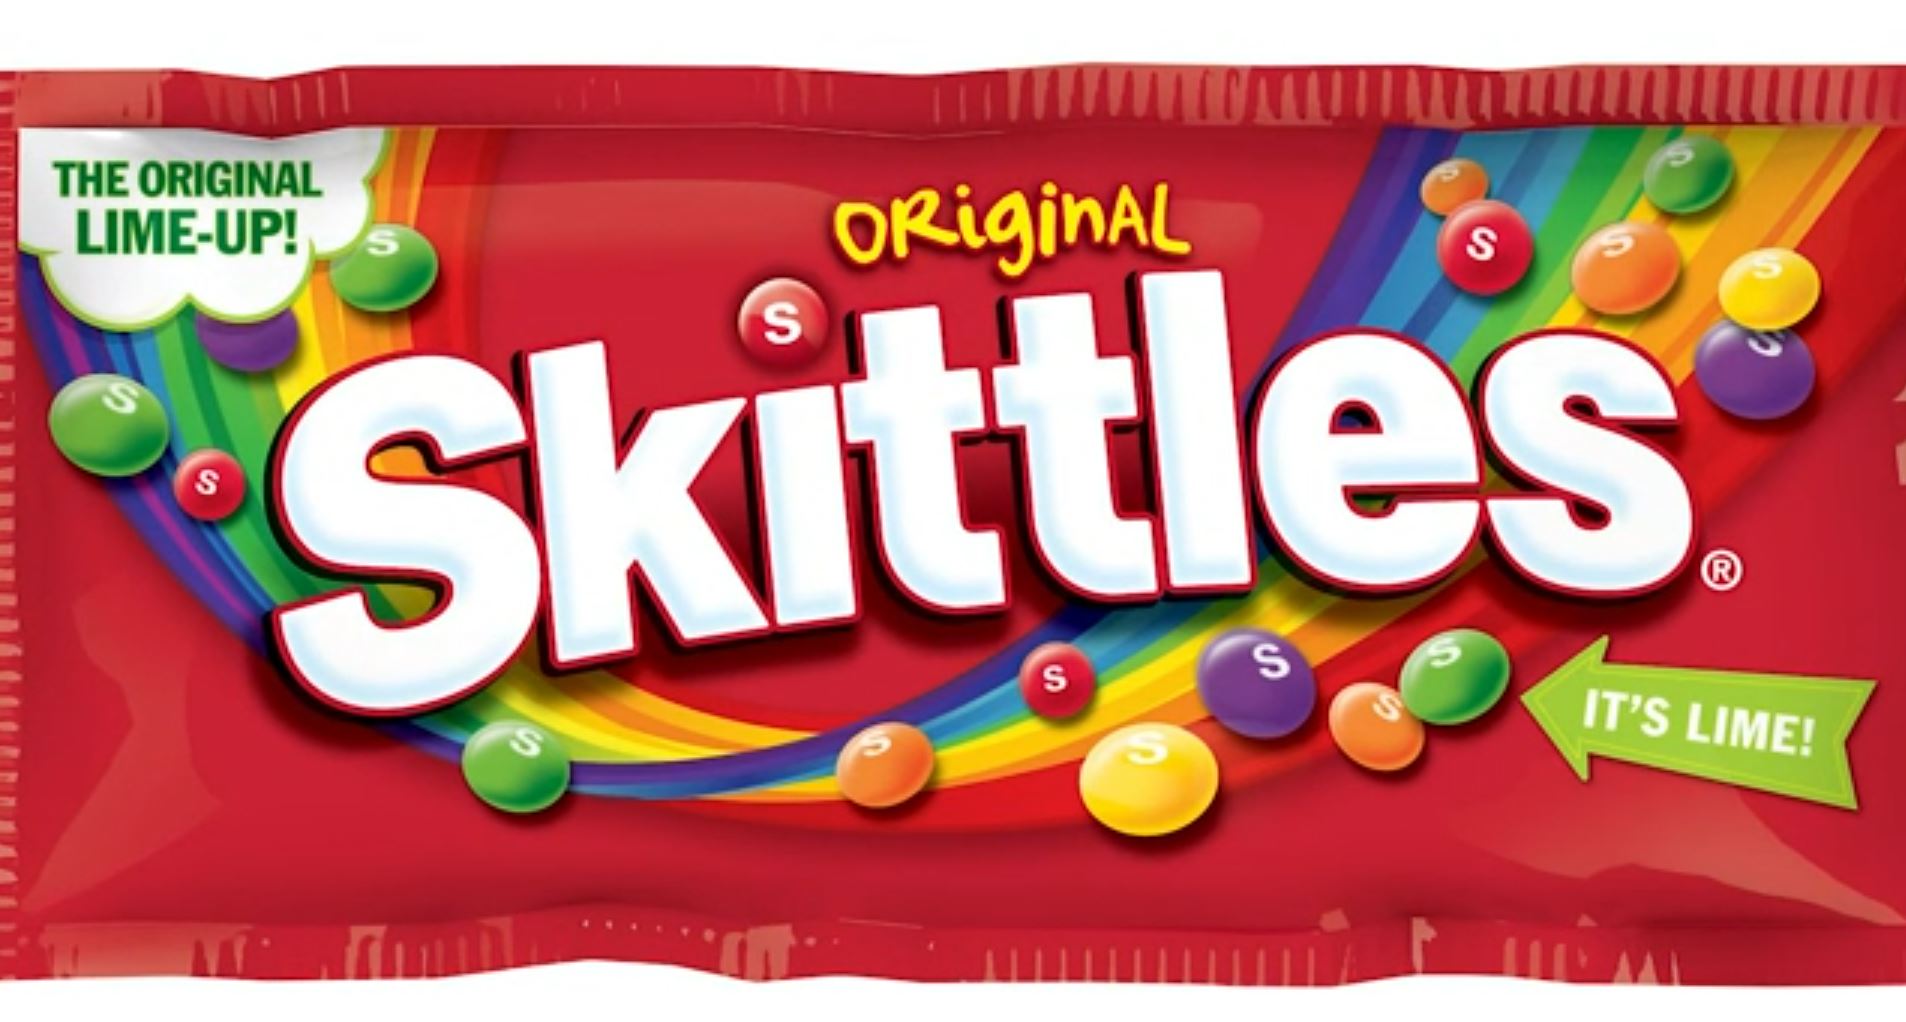 Bye-bye green apple: Skittles back lime flavor after 8 years